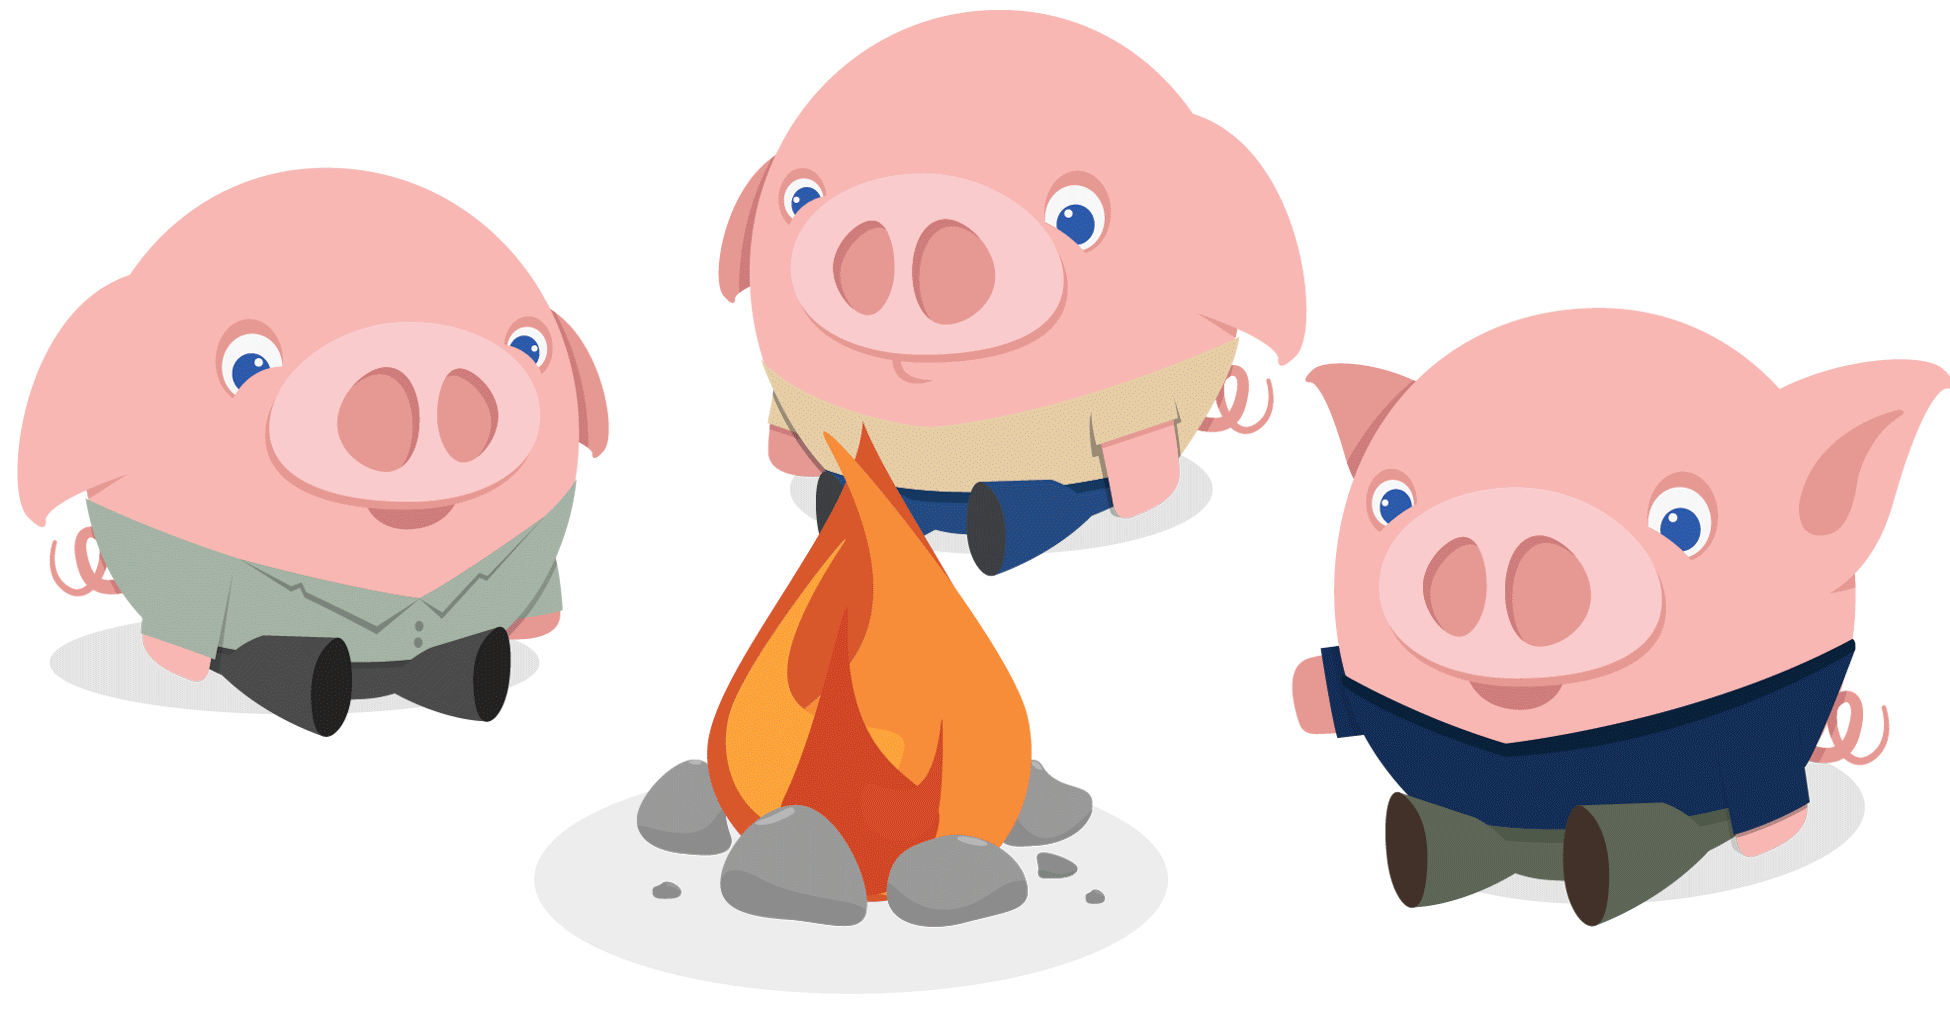 pig clipart tired